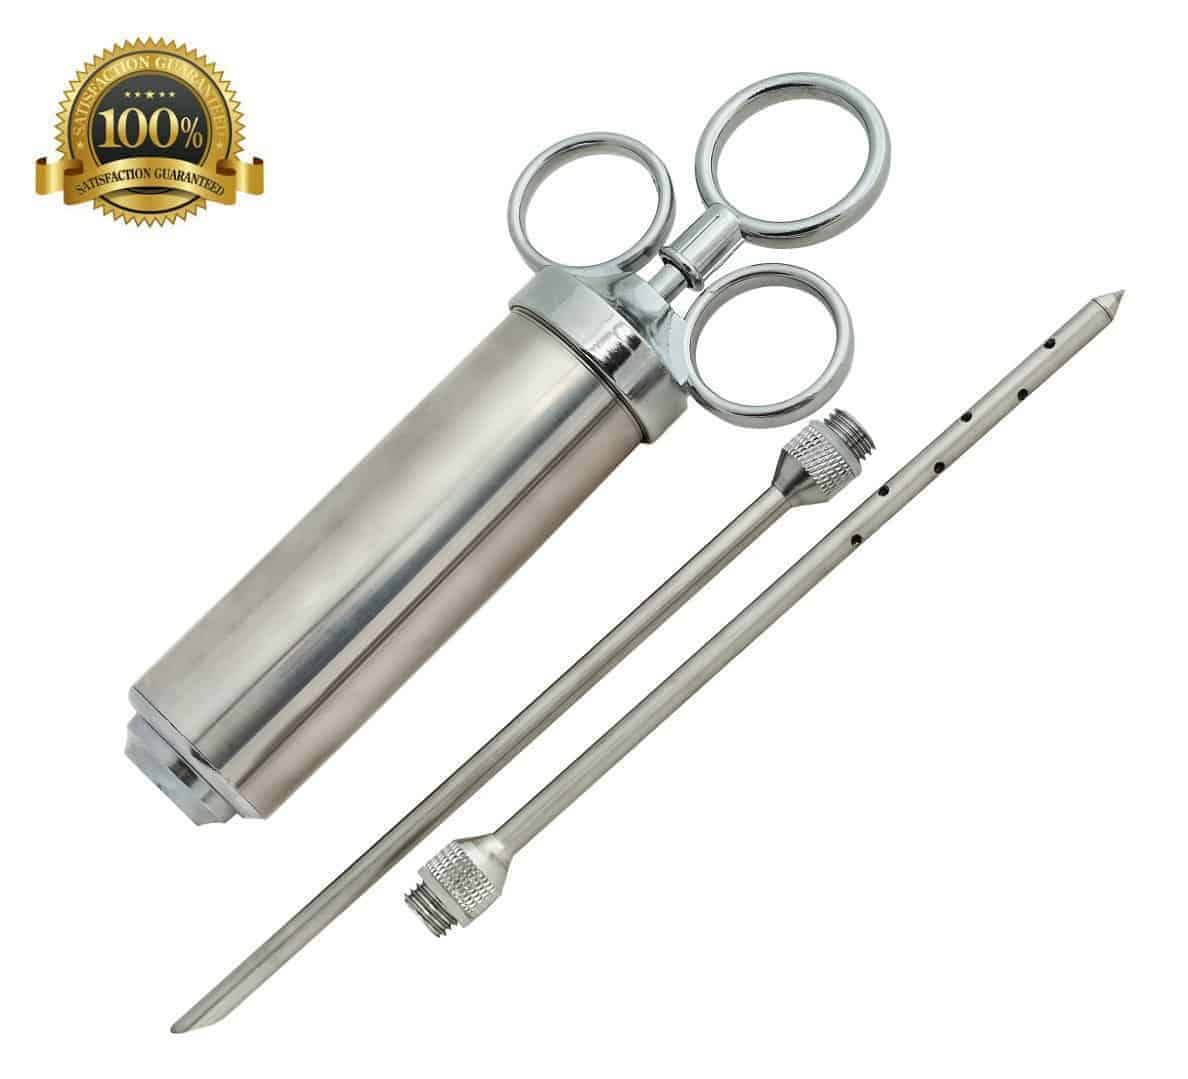 Heavy Duty Meat Injector 304 Stainless Steel - 2 Oz Seasoning Injector - Marinade Injector Syringe Includes 2 Needles 